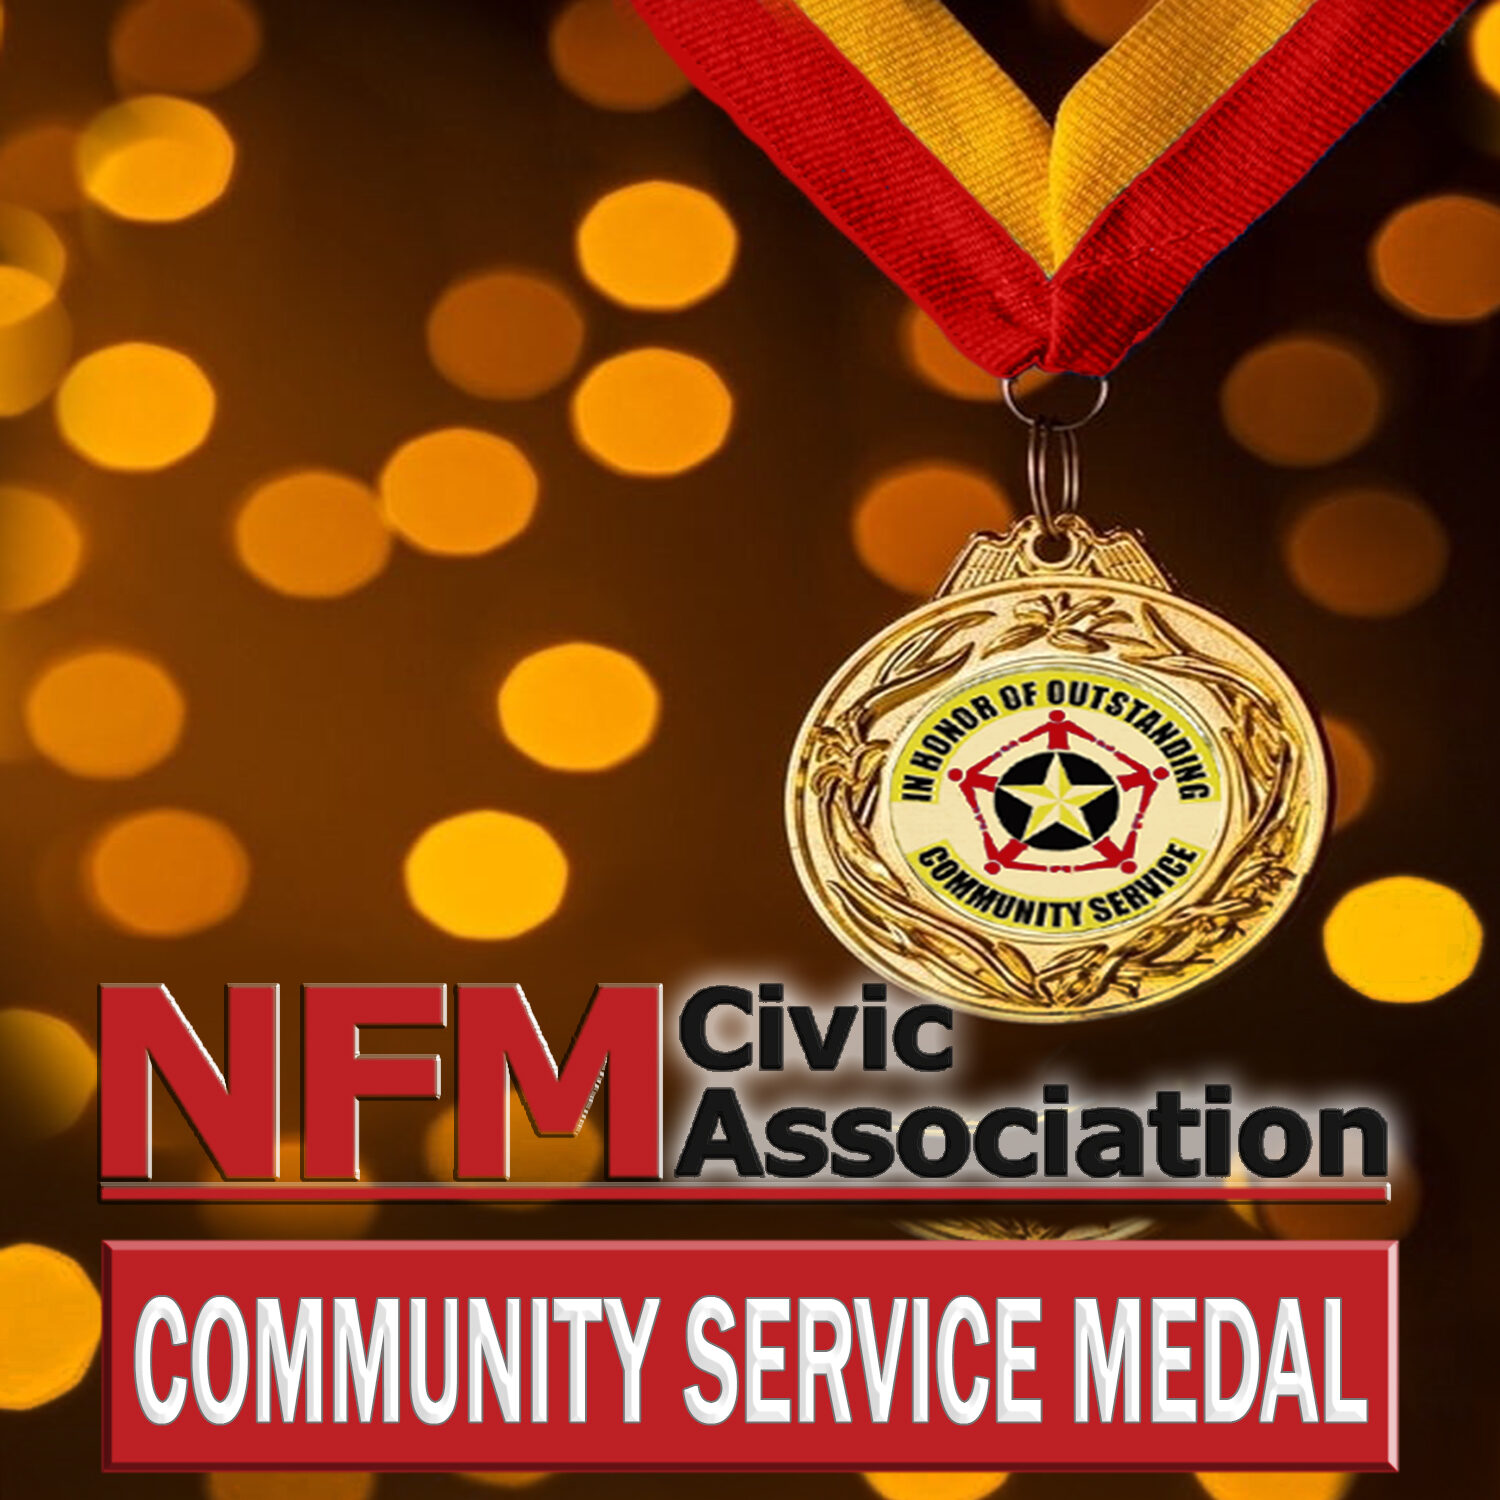 North Fort Myers Community Service Medal, to honor a special achievement by a resident or group that has helped the community.